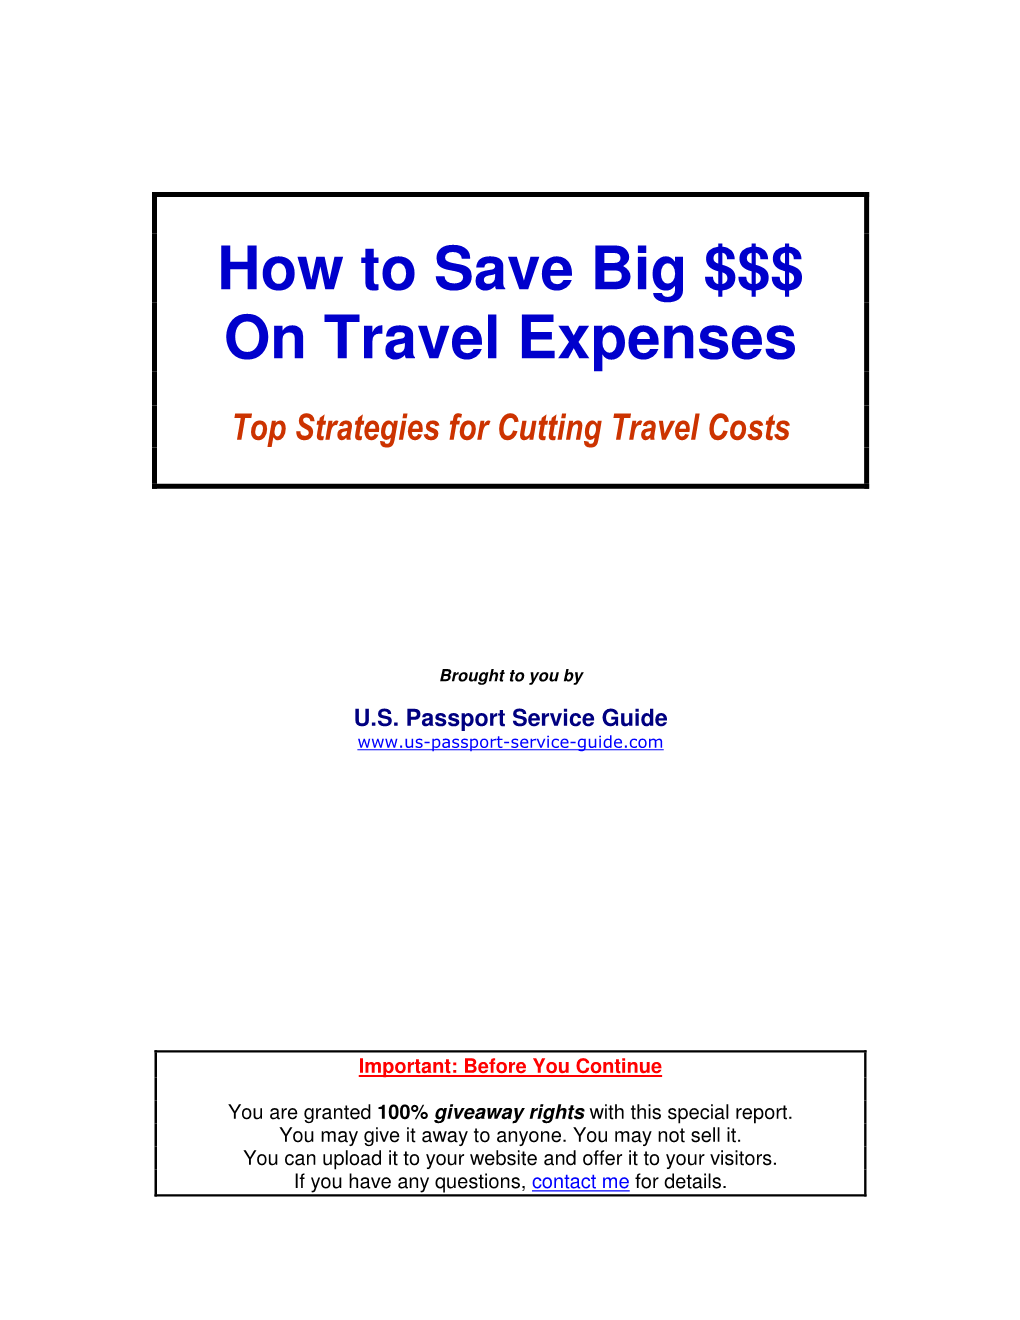 77 Ways to Save on Travel